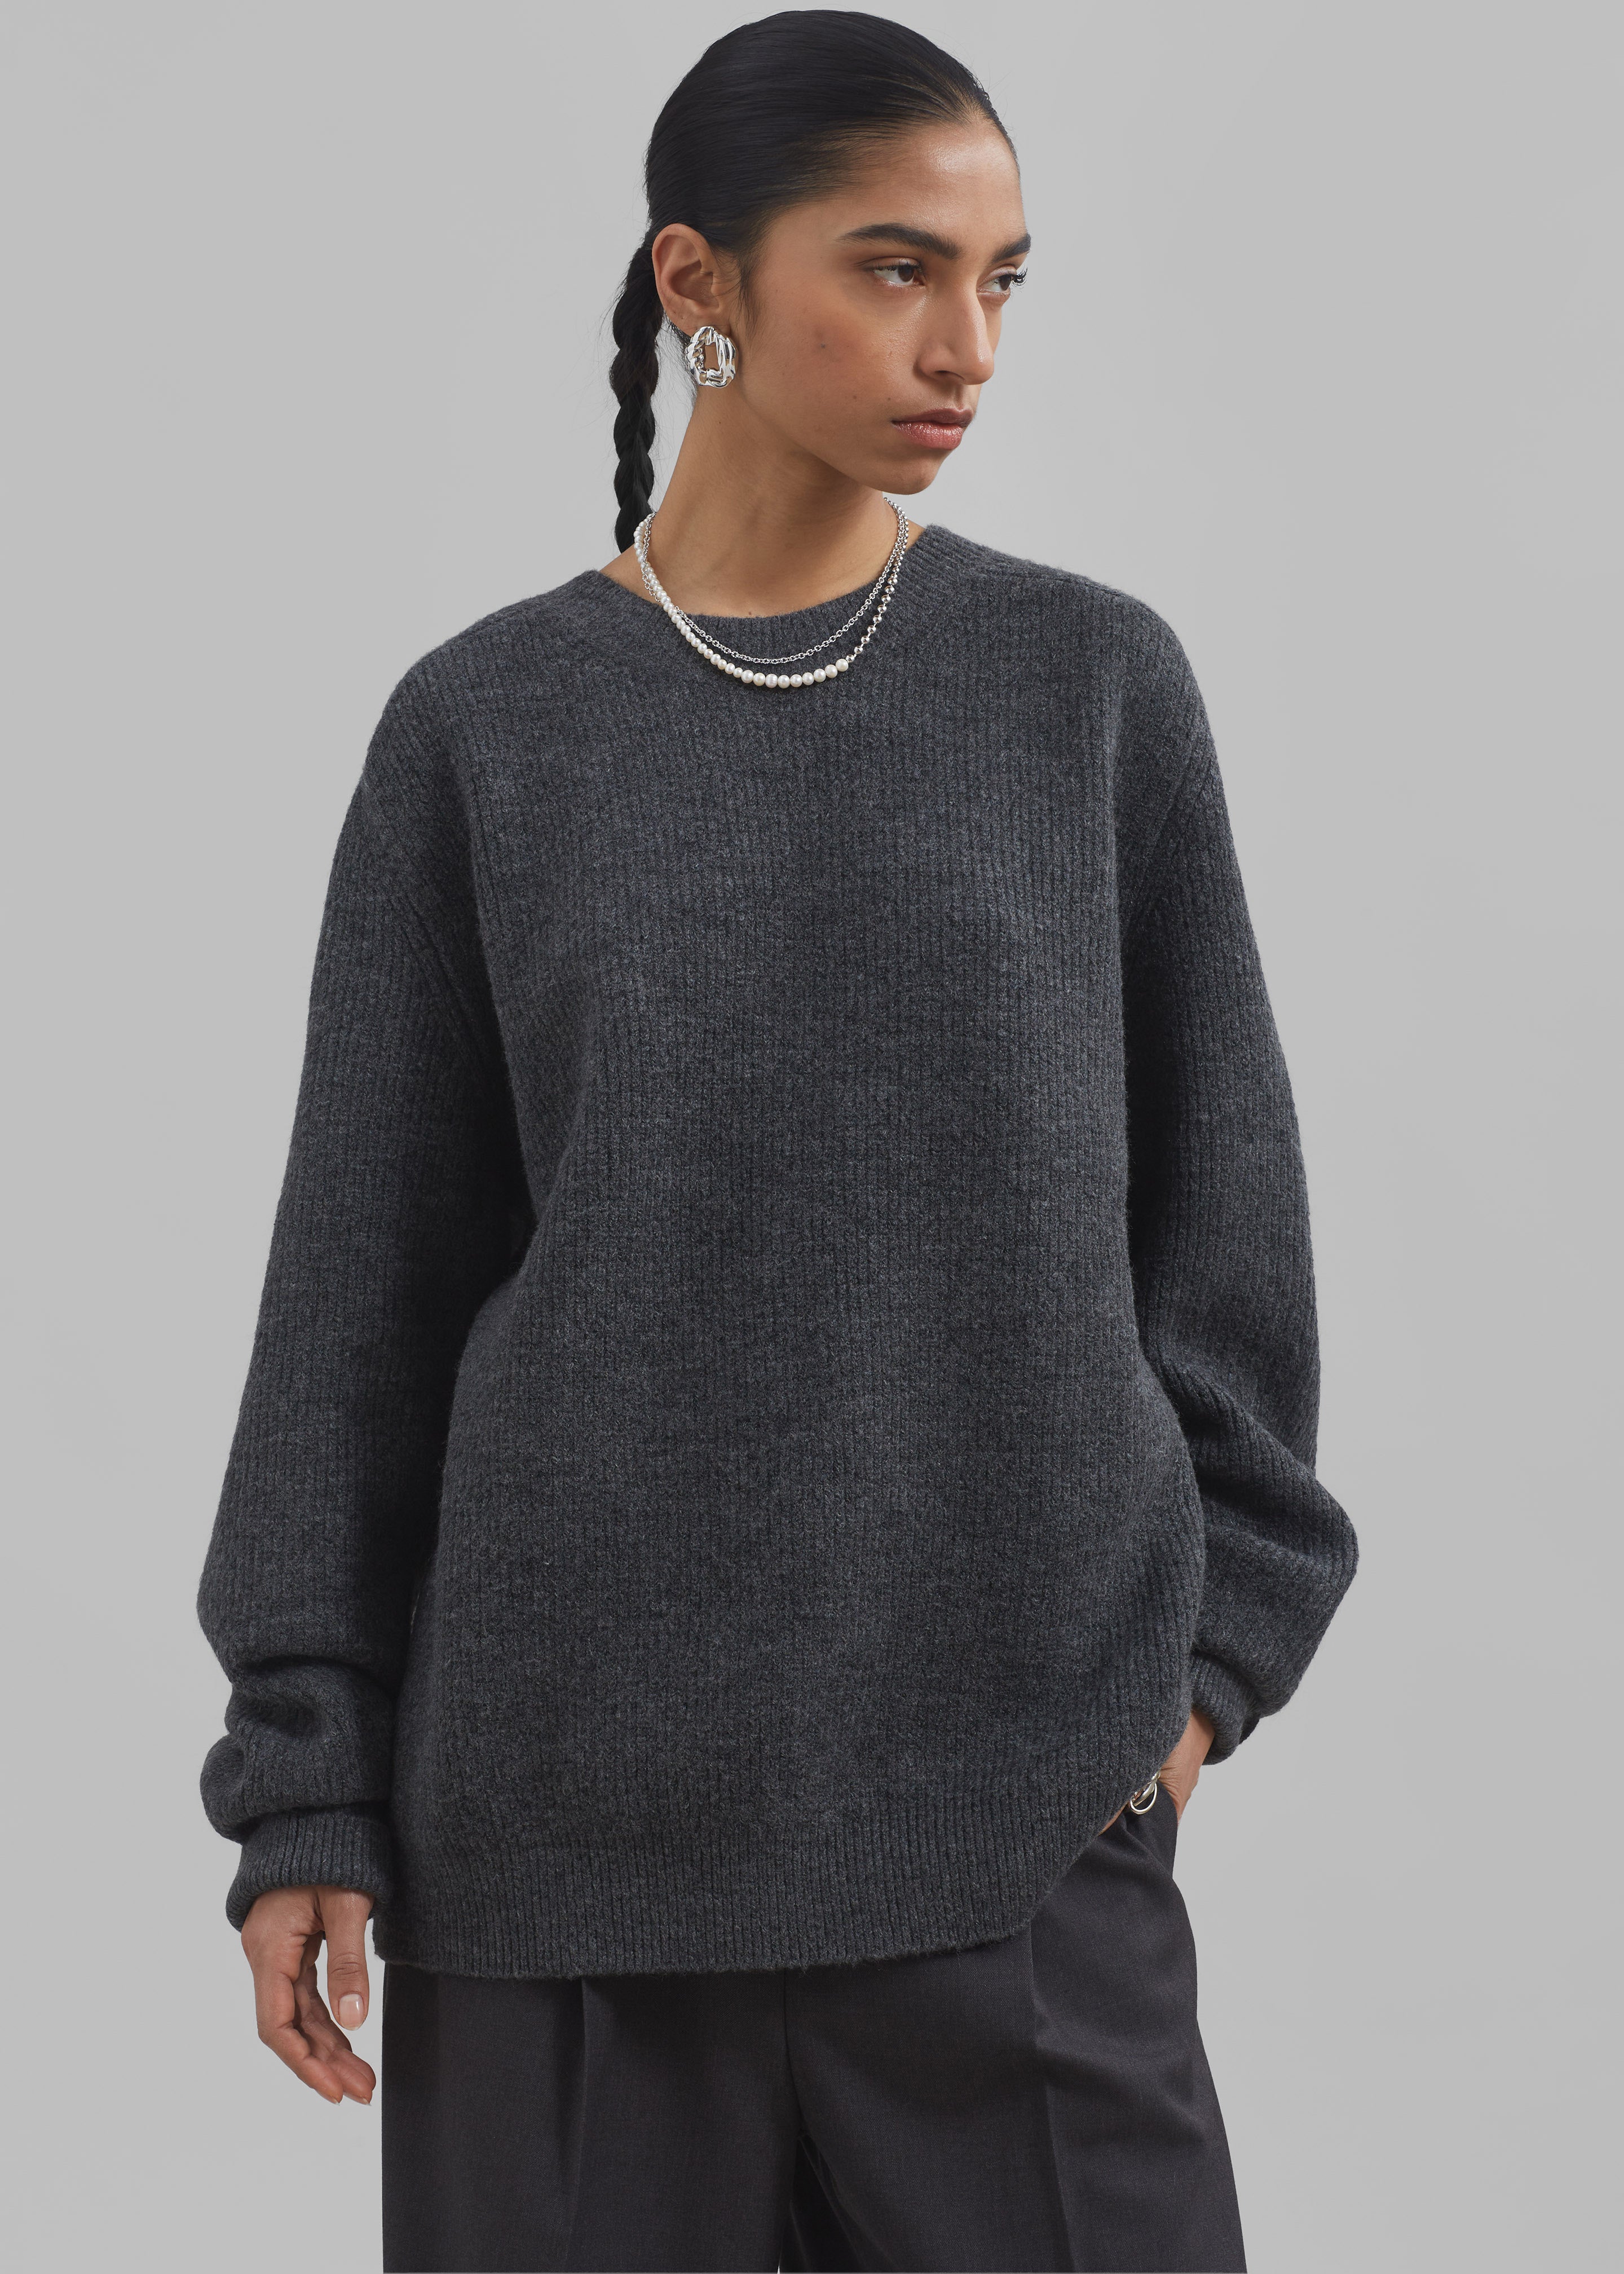 Emory Sweater - Charcoal - 7